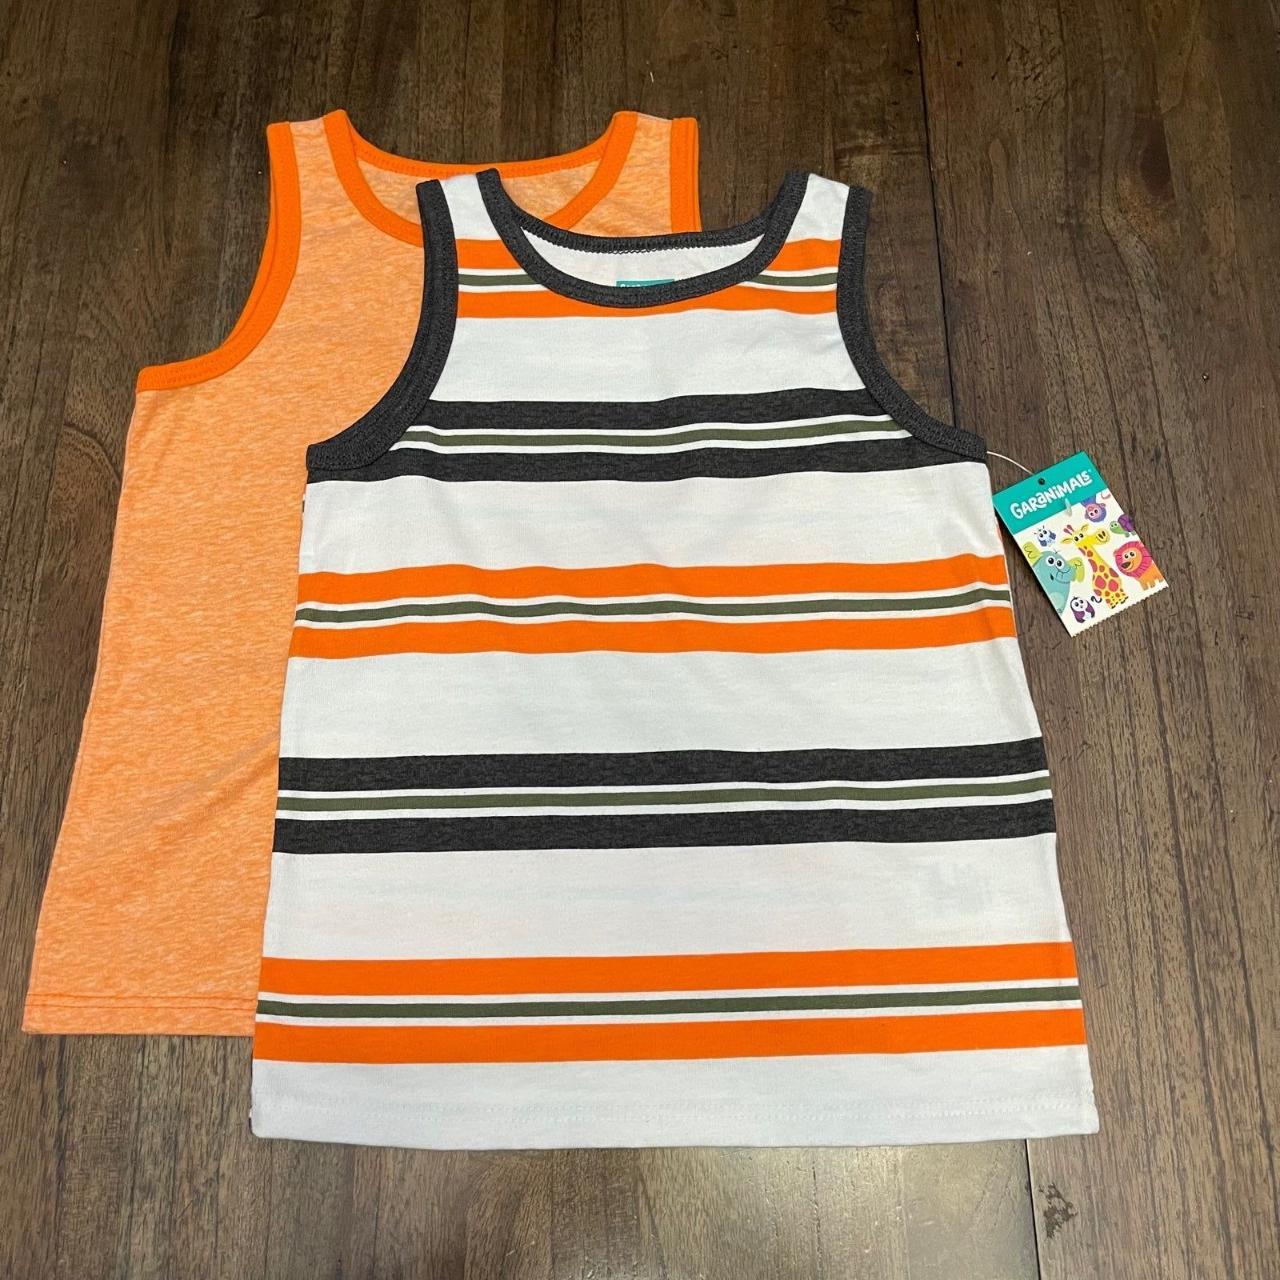 Product Image 1 - 2 Tanks SIZE 4T

New with